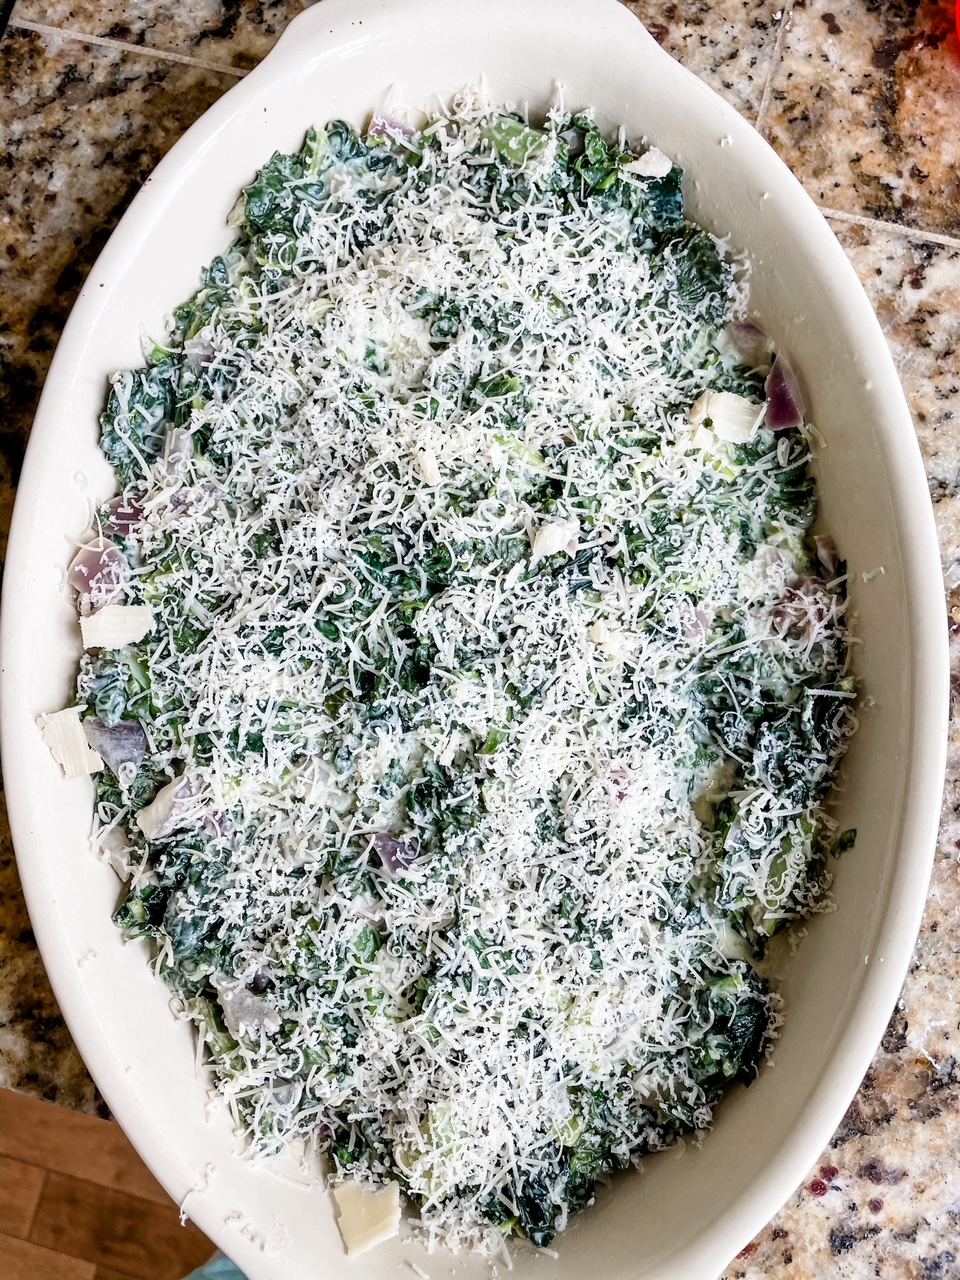 The Creamed Kale Casserole with Parmesan, ready to be placed on the oven